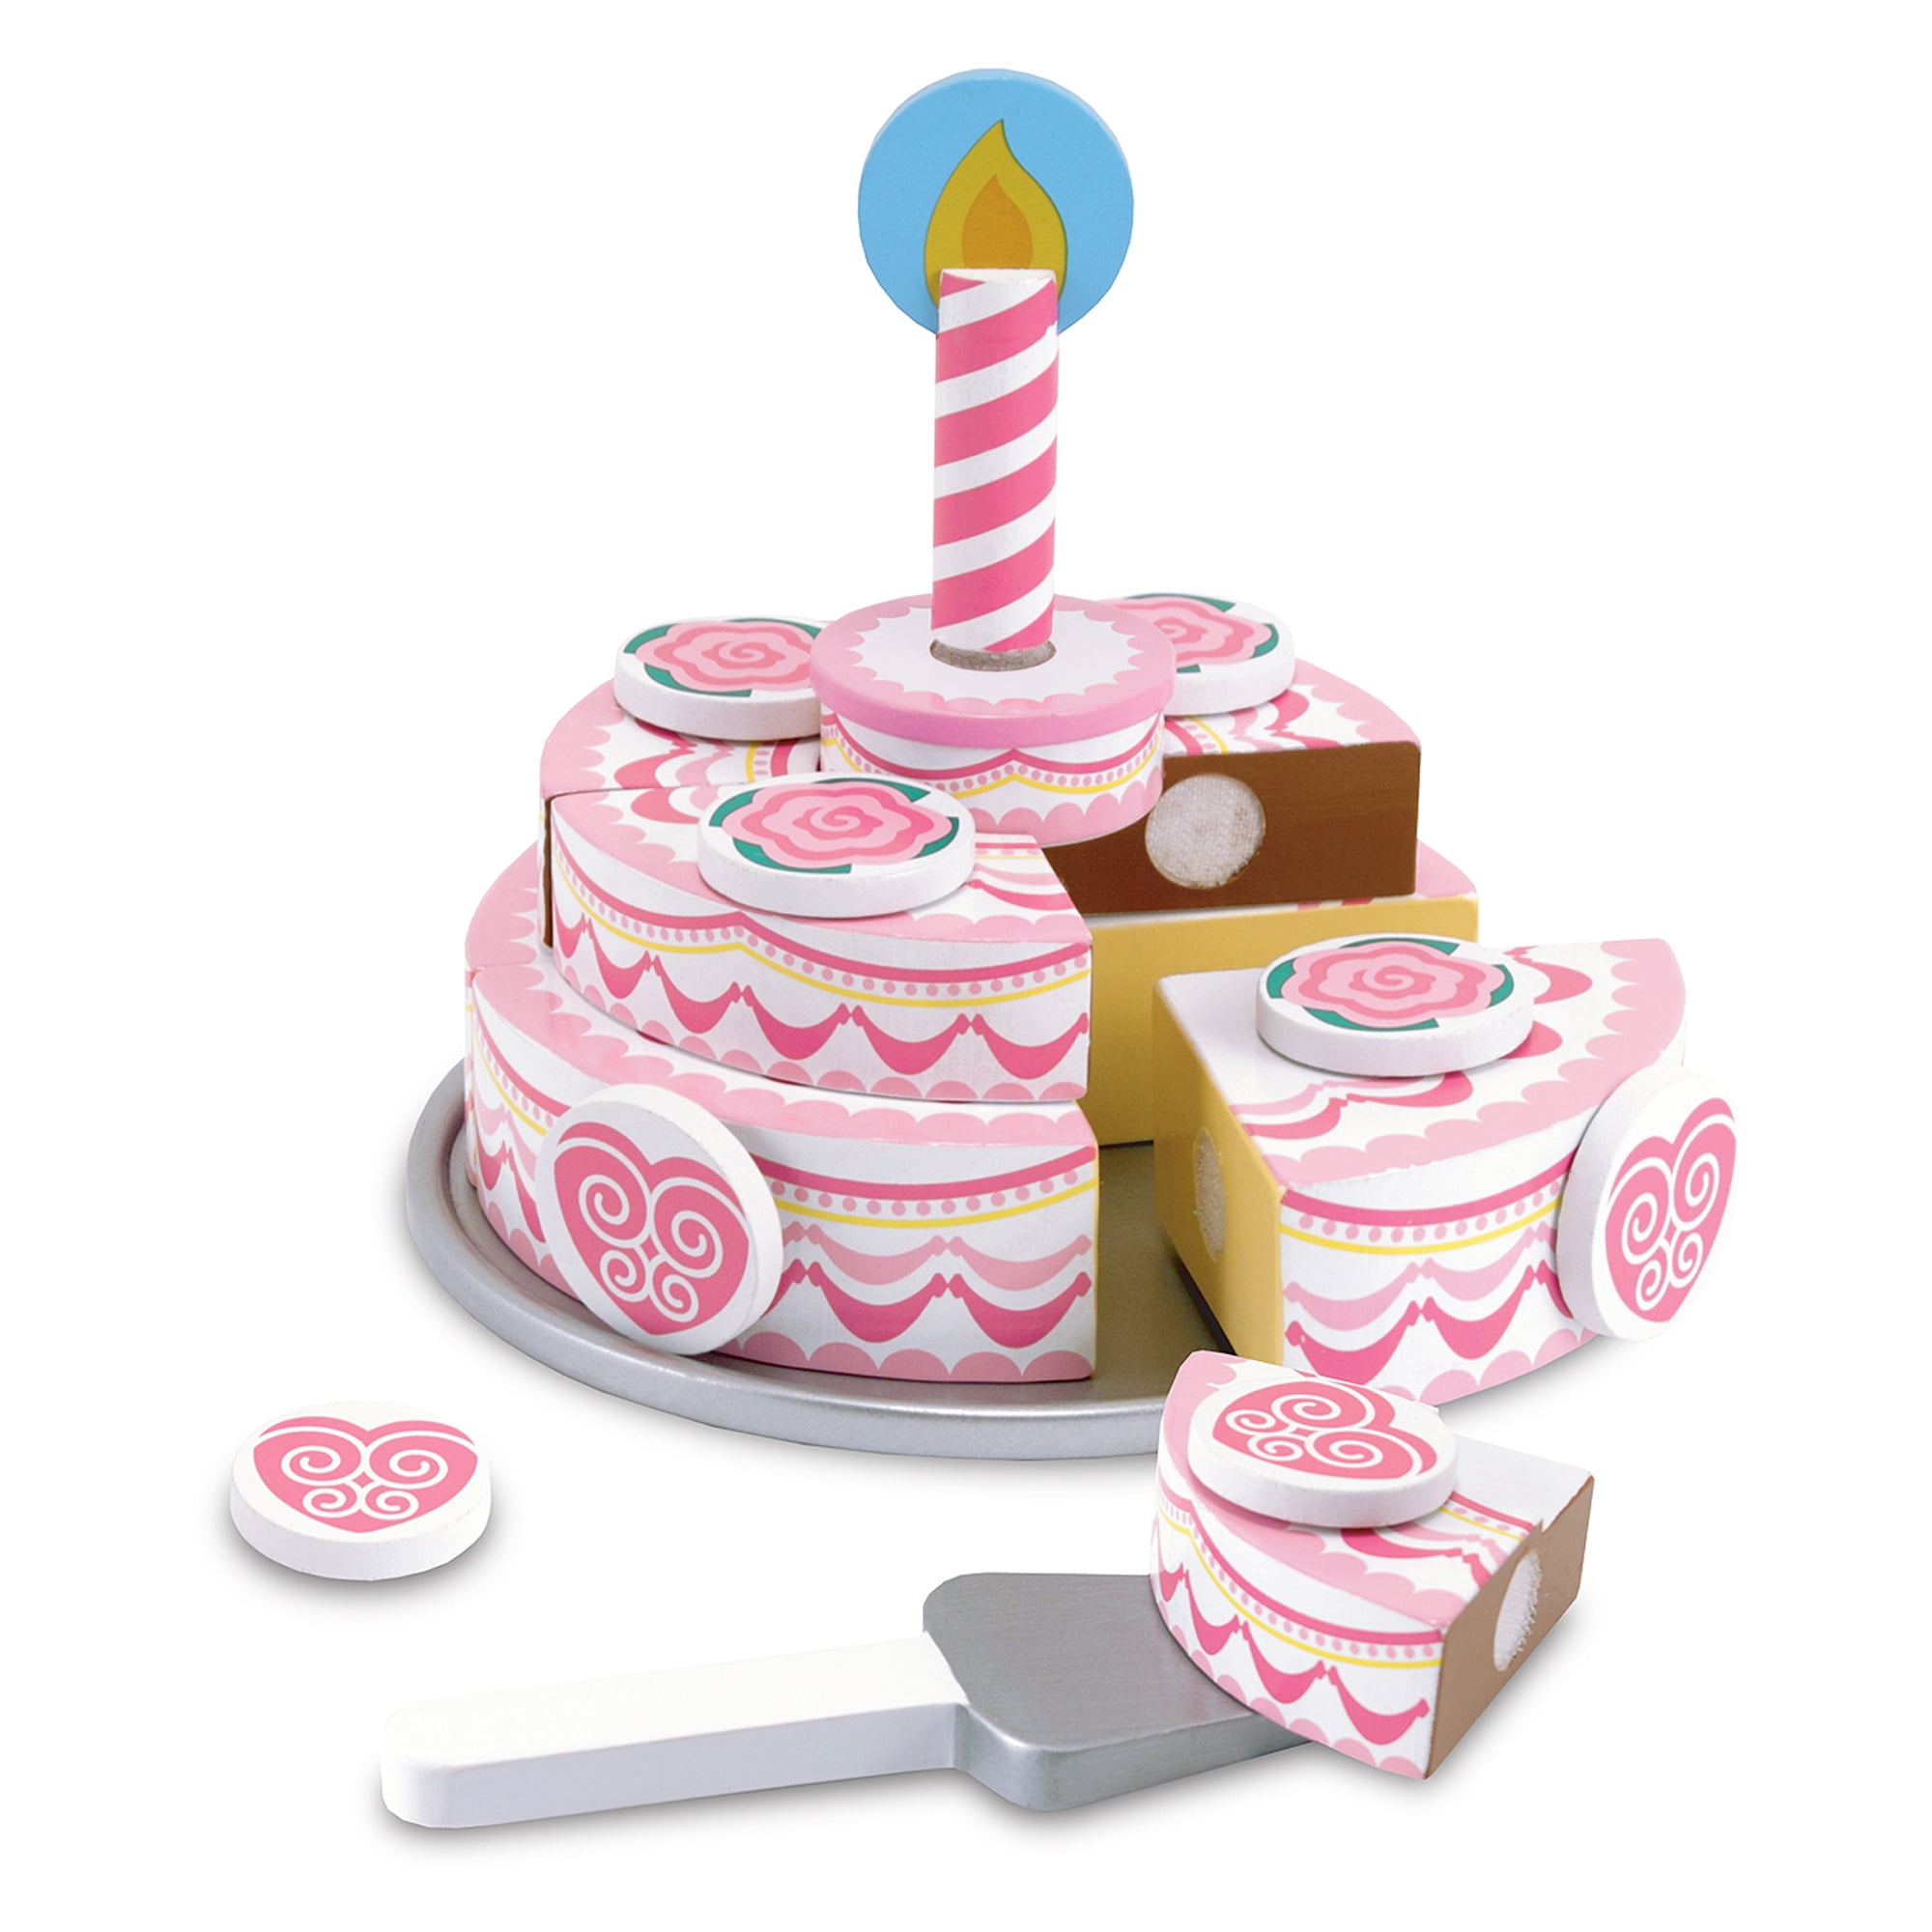 Triple-layer Party Cake Wooden Play Food Kitchen Grocery Melissa & Doug 4069 for sale online 